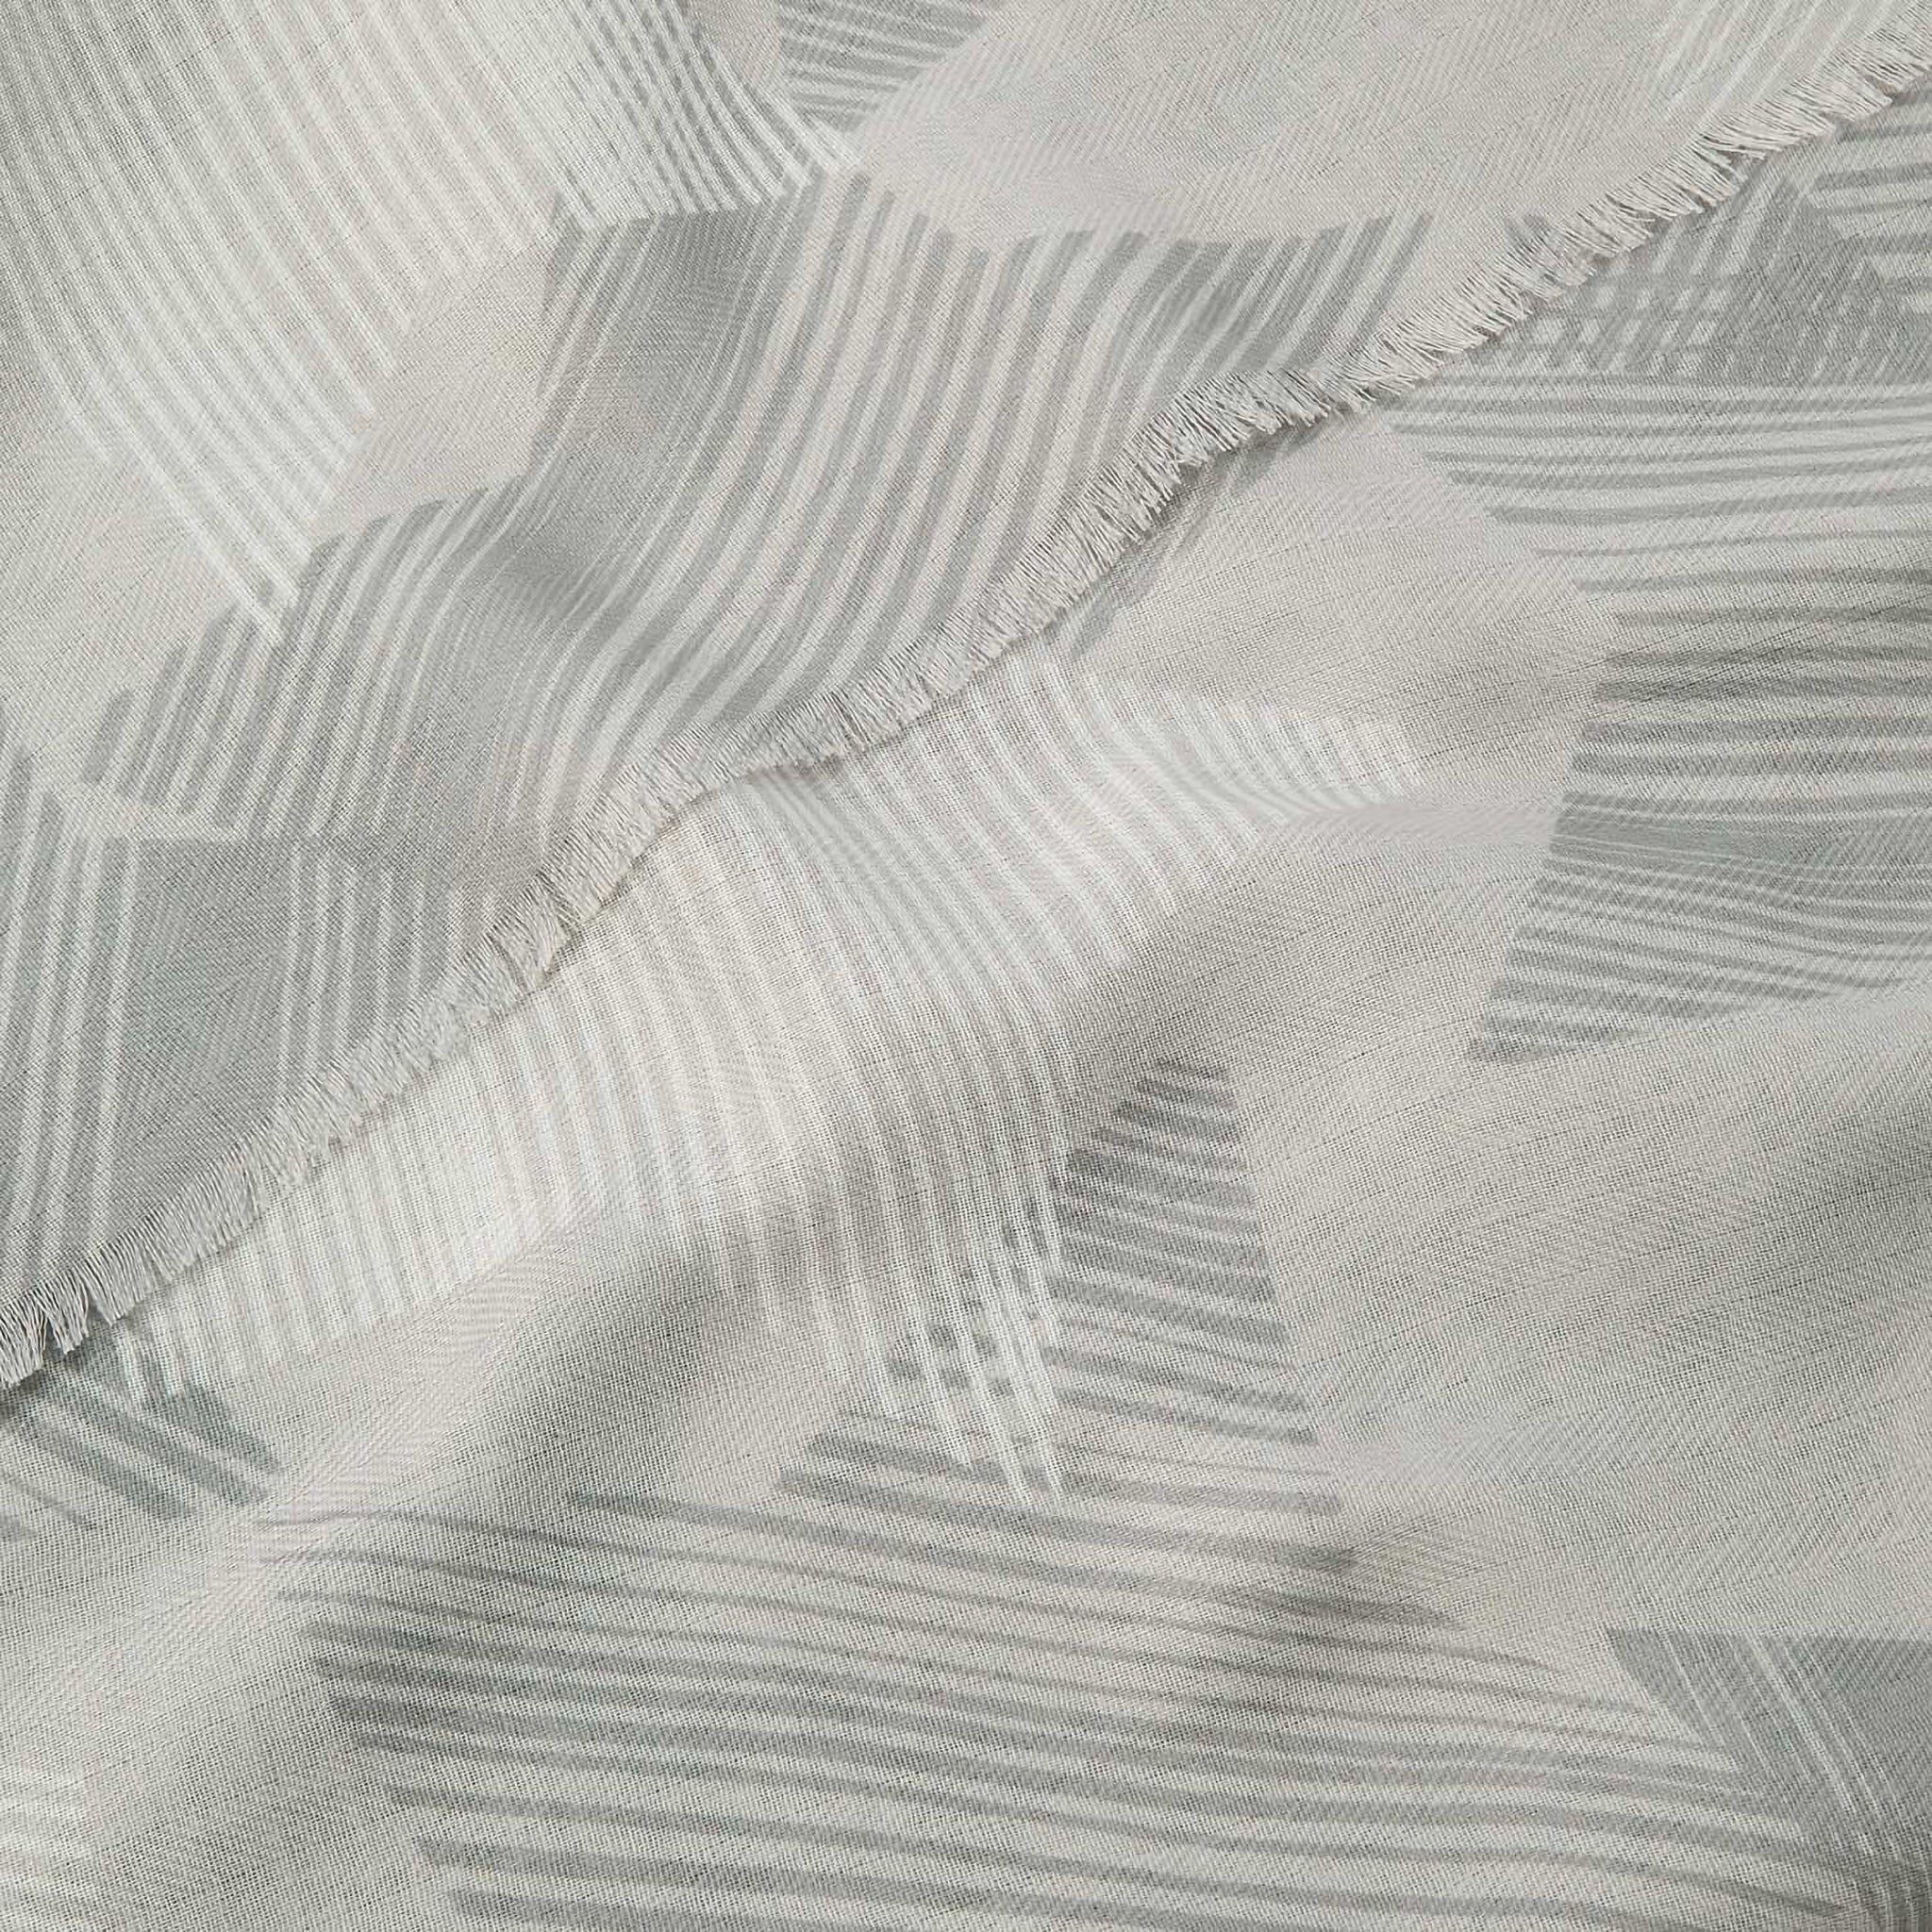 Detailed zoom of a scarf featuring sketch line star pattern in grey and white